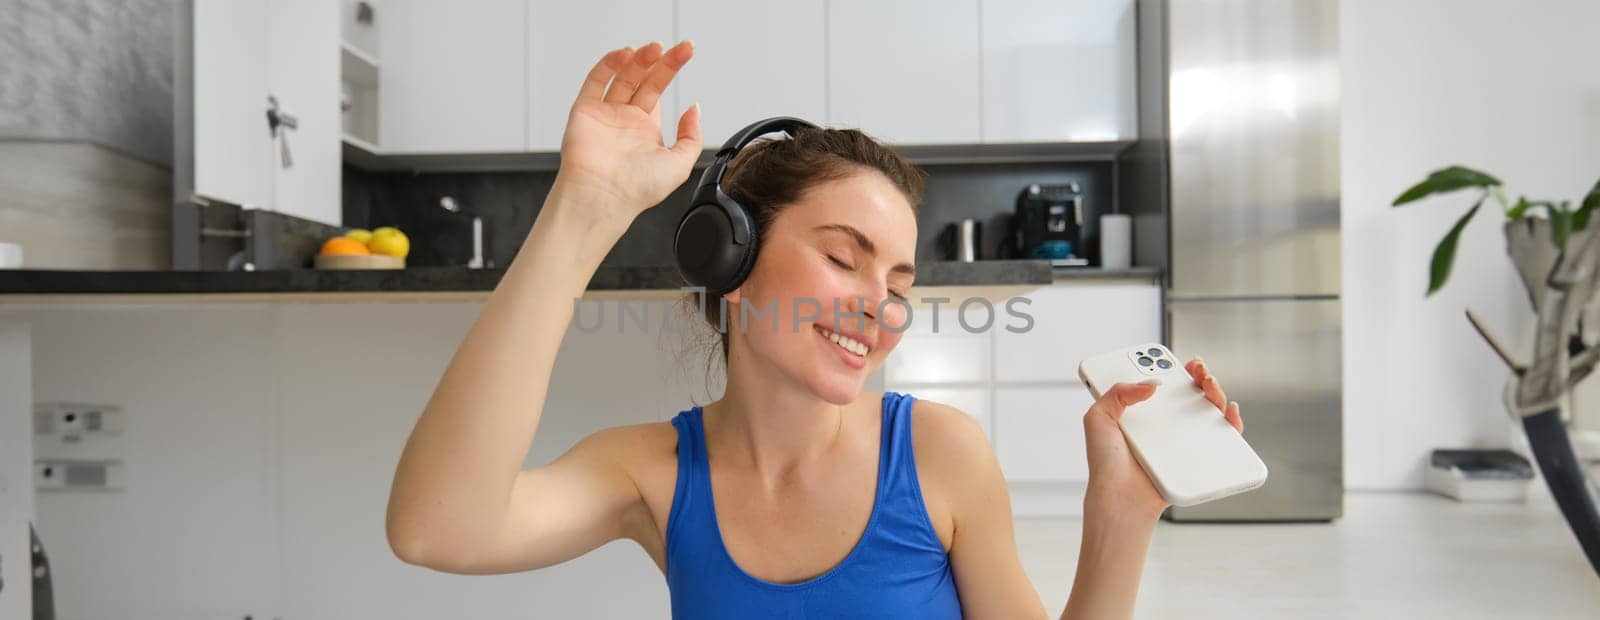 Portrait of fitness instructor, woman with headphones and smartphone, dancing at home, workout inside her house, wearing blue sportsbra.